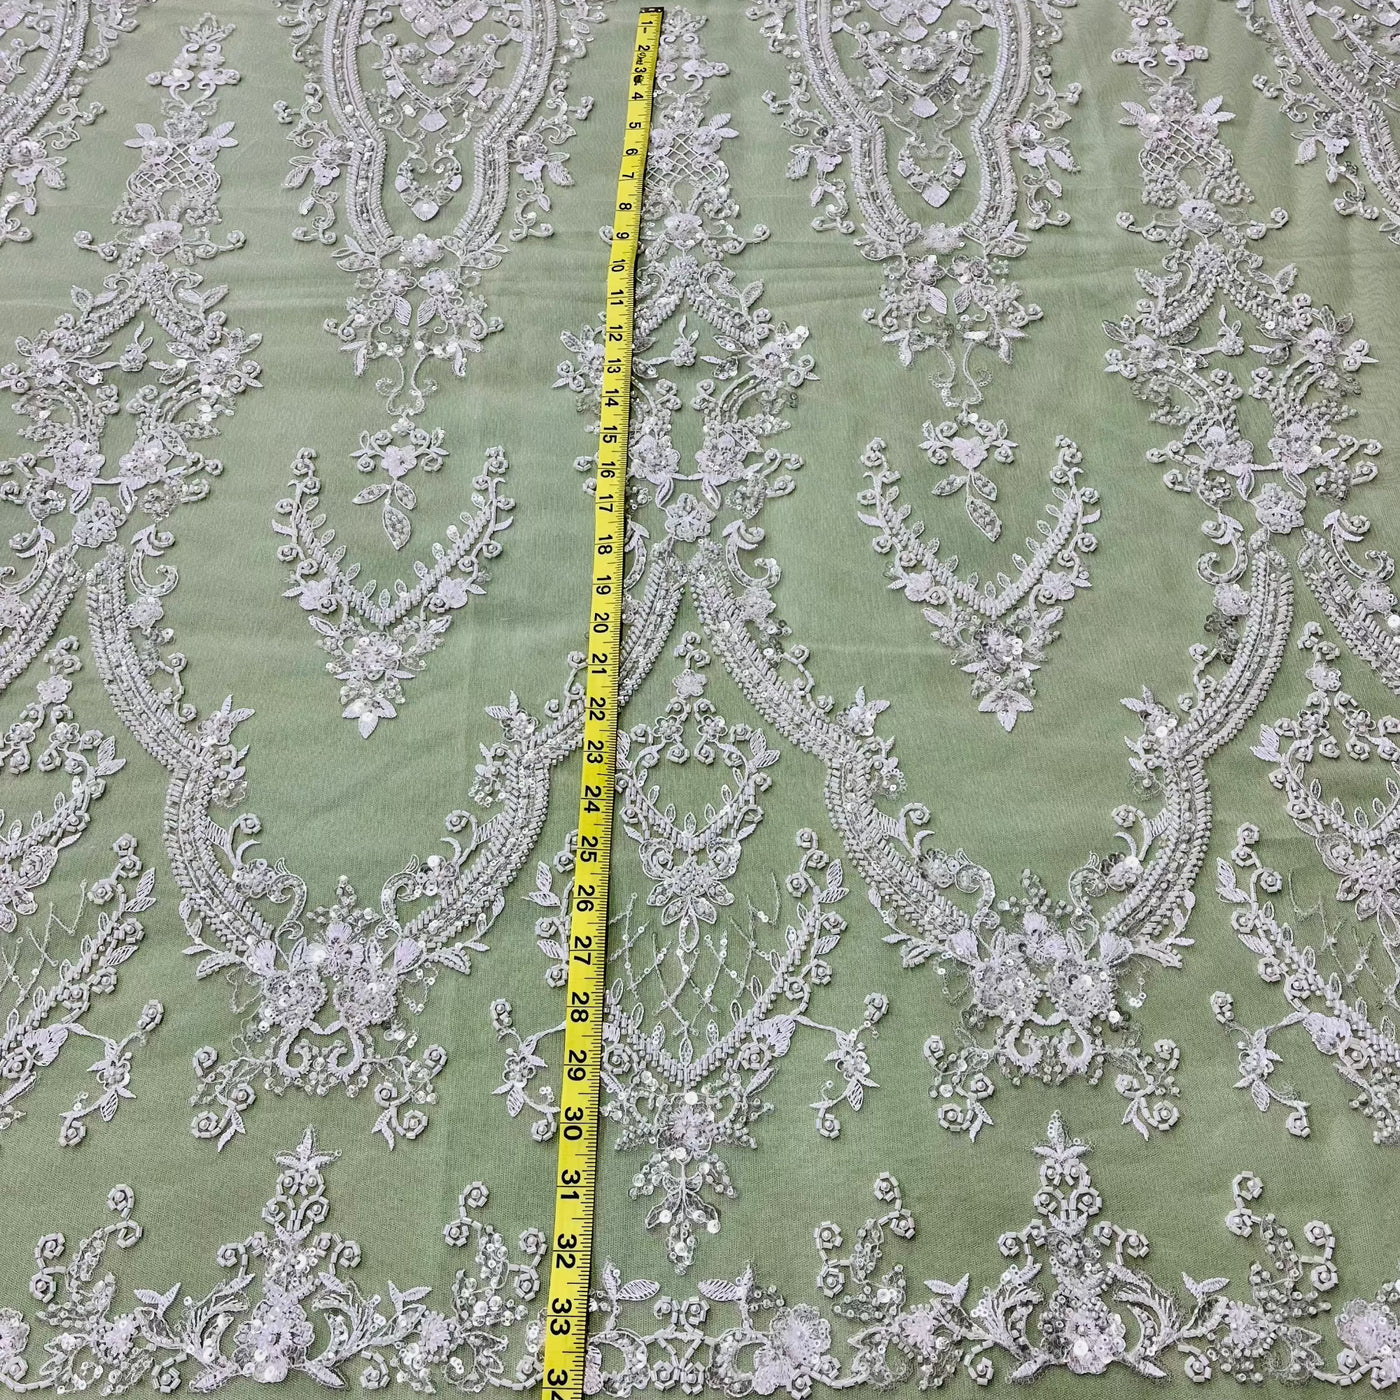 Beaded Lace Fabric Embroidered on 100% Polyester Net Mesh | Lace USA - GD-227239 Ivory